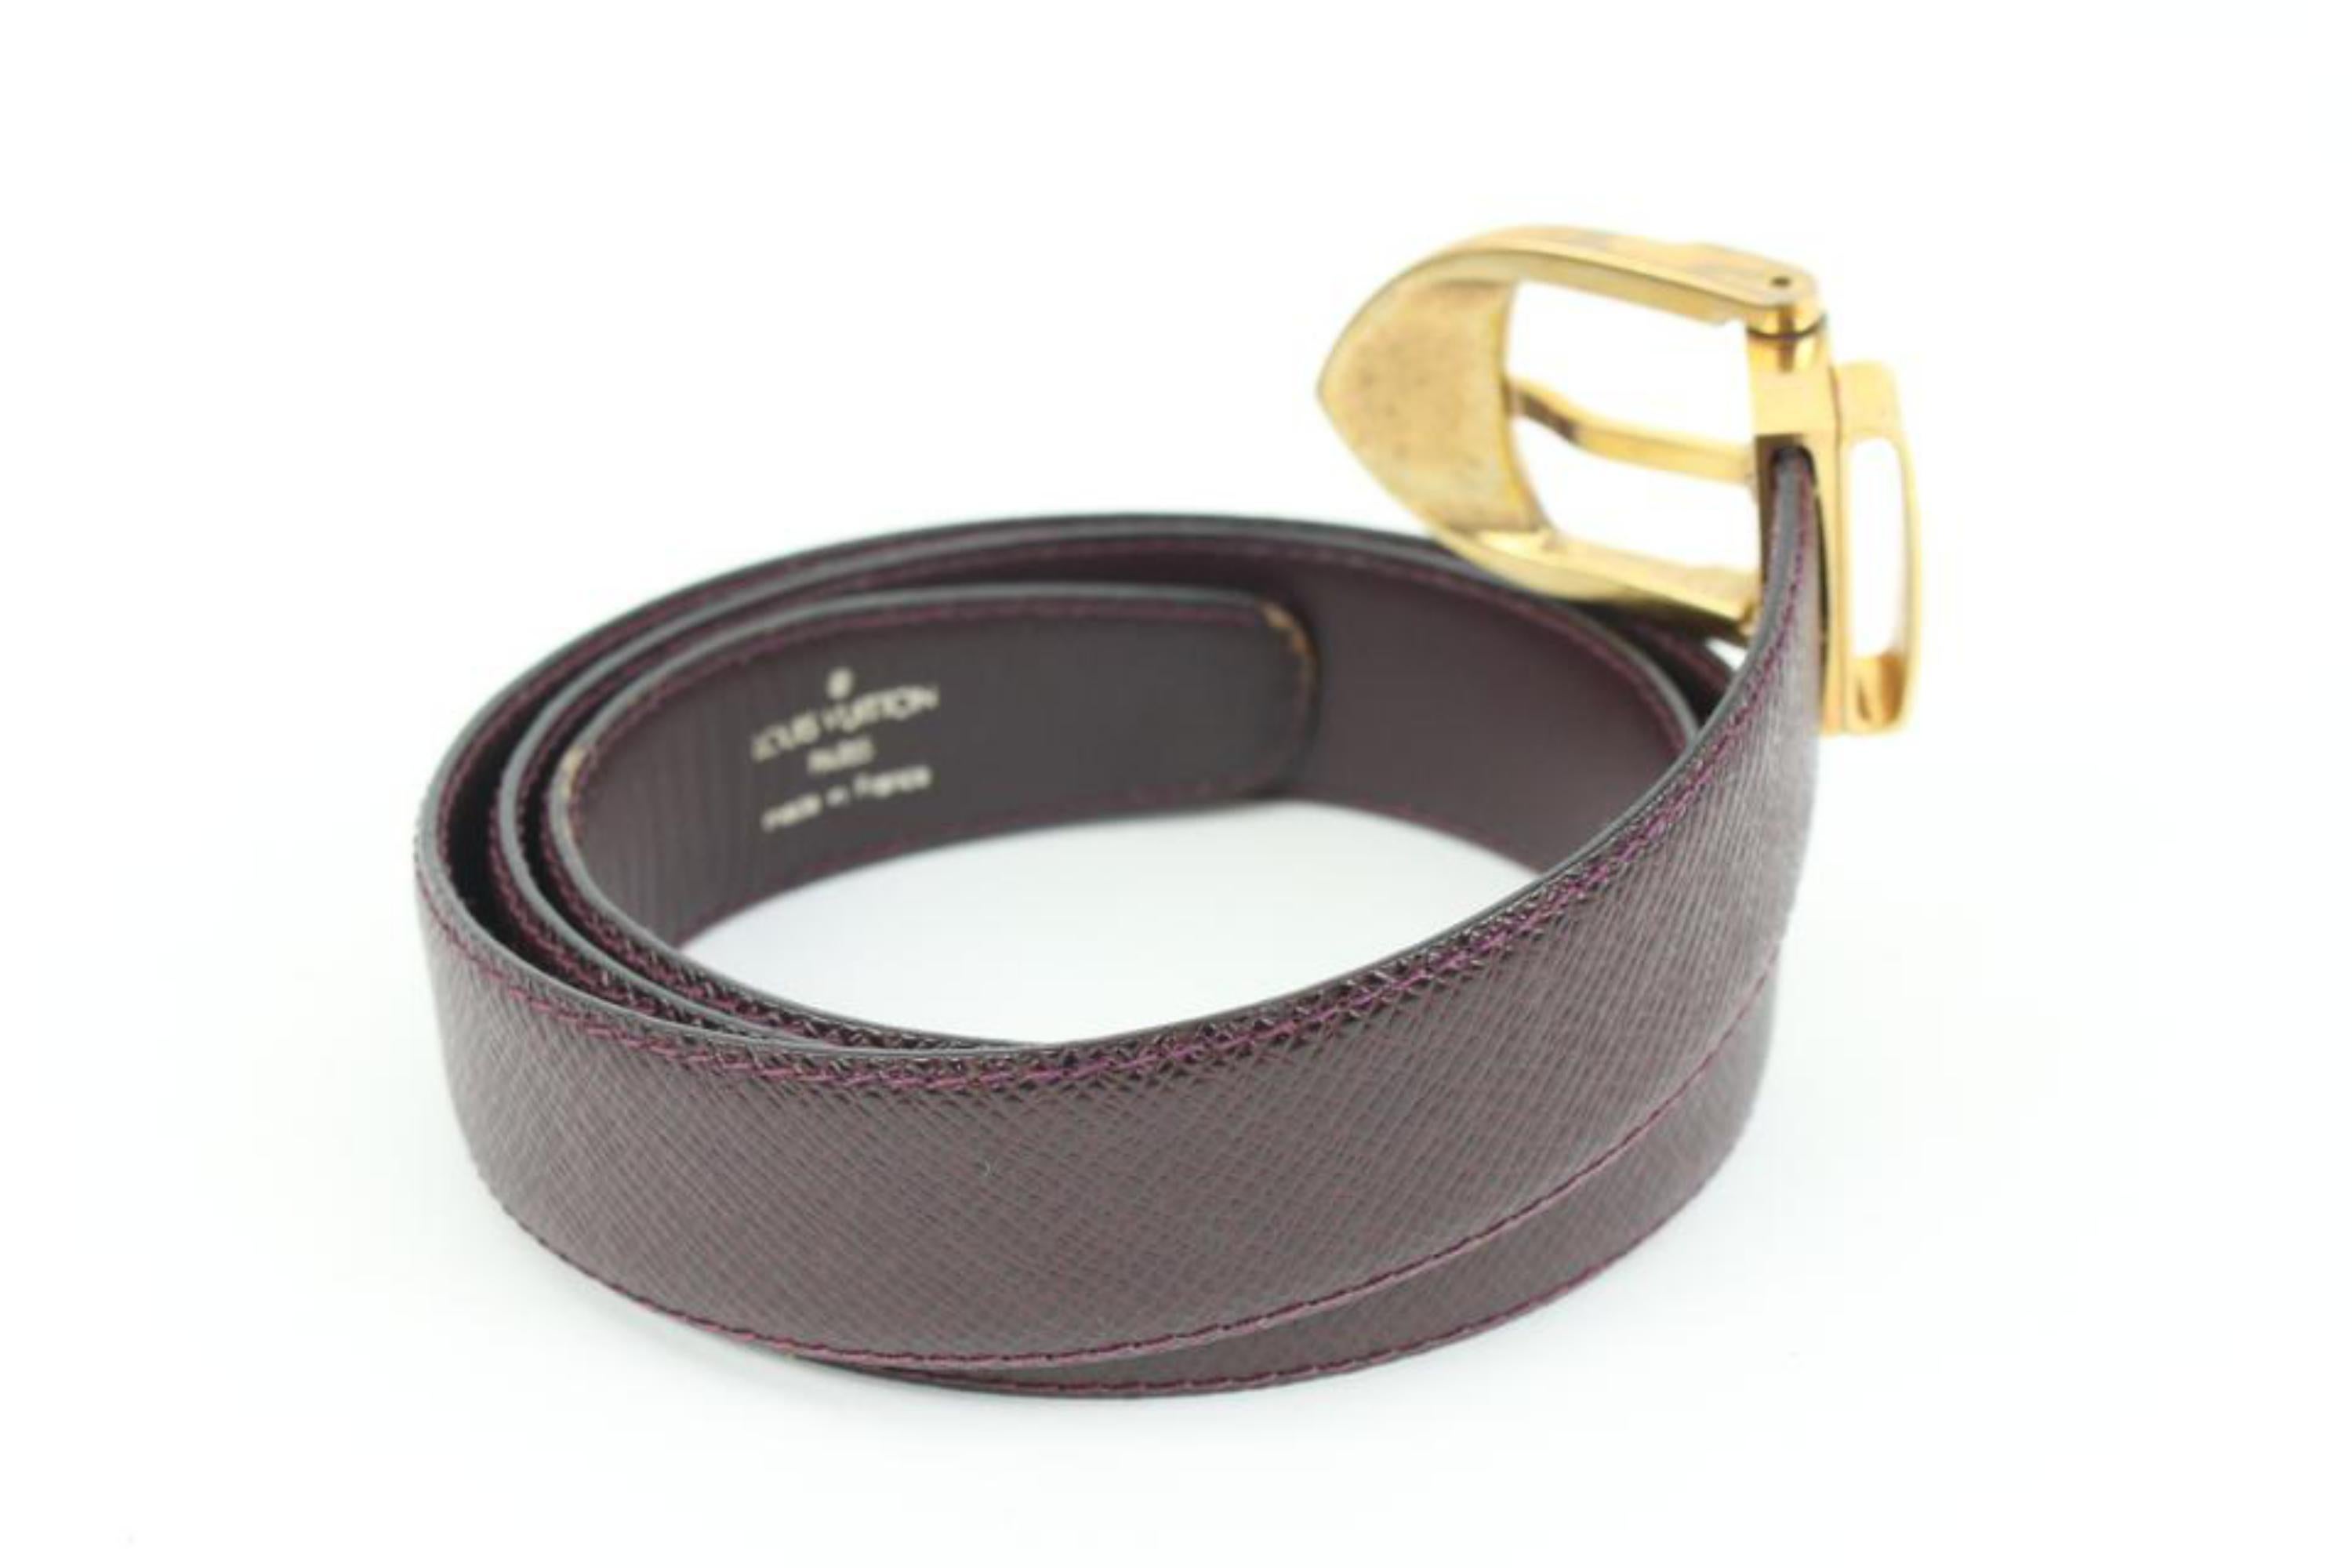 Louis Vuitton 110/44 Bordeaux Taiga Leather Ceinture Belt 96lk412s In Good Condition For Sale In Dix hills, NY